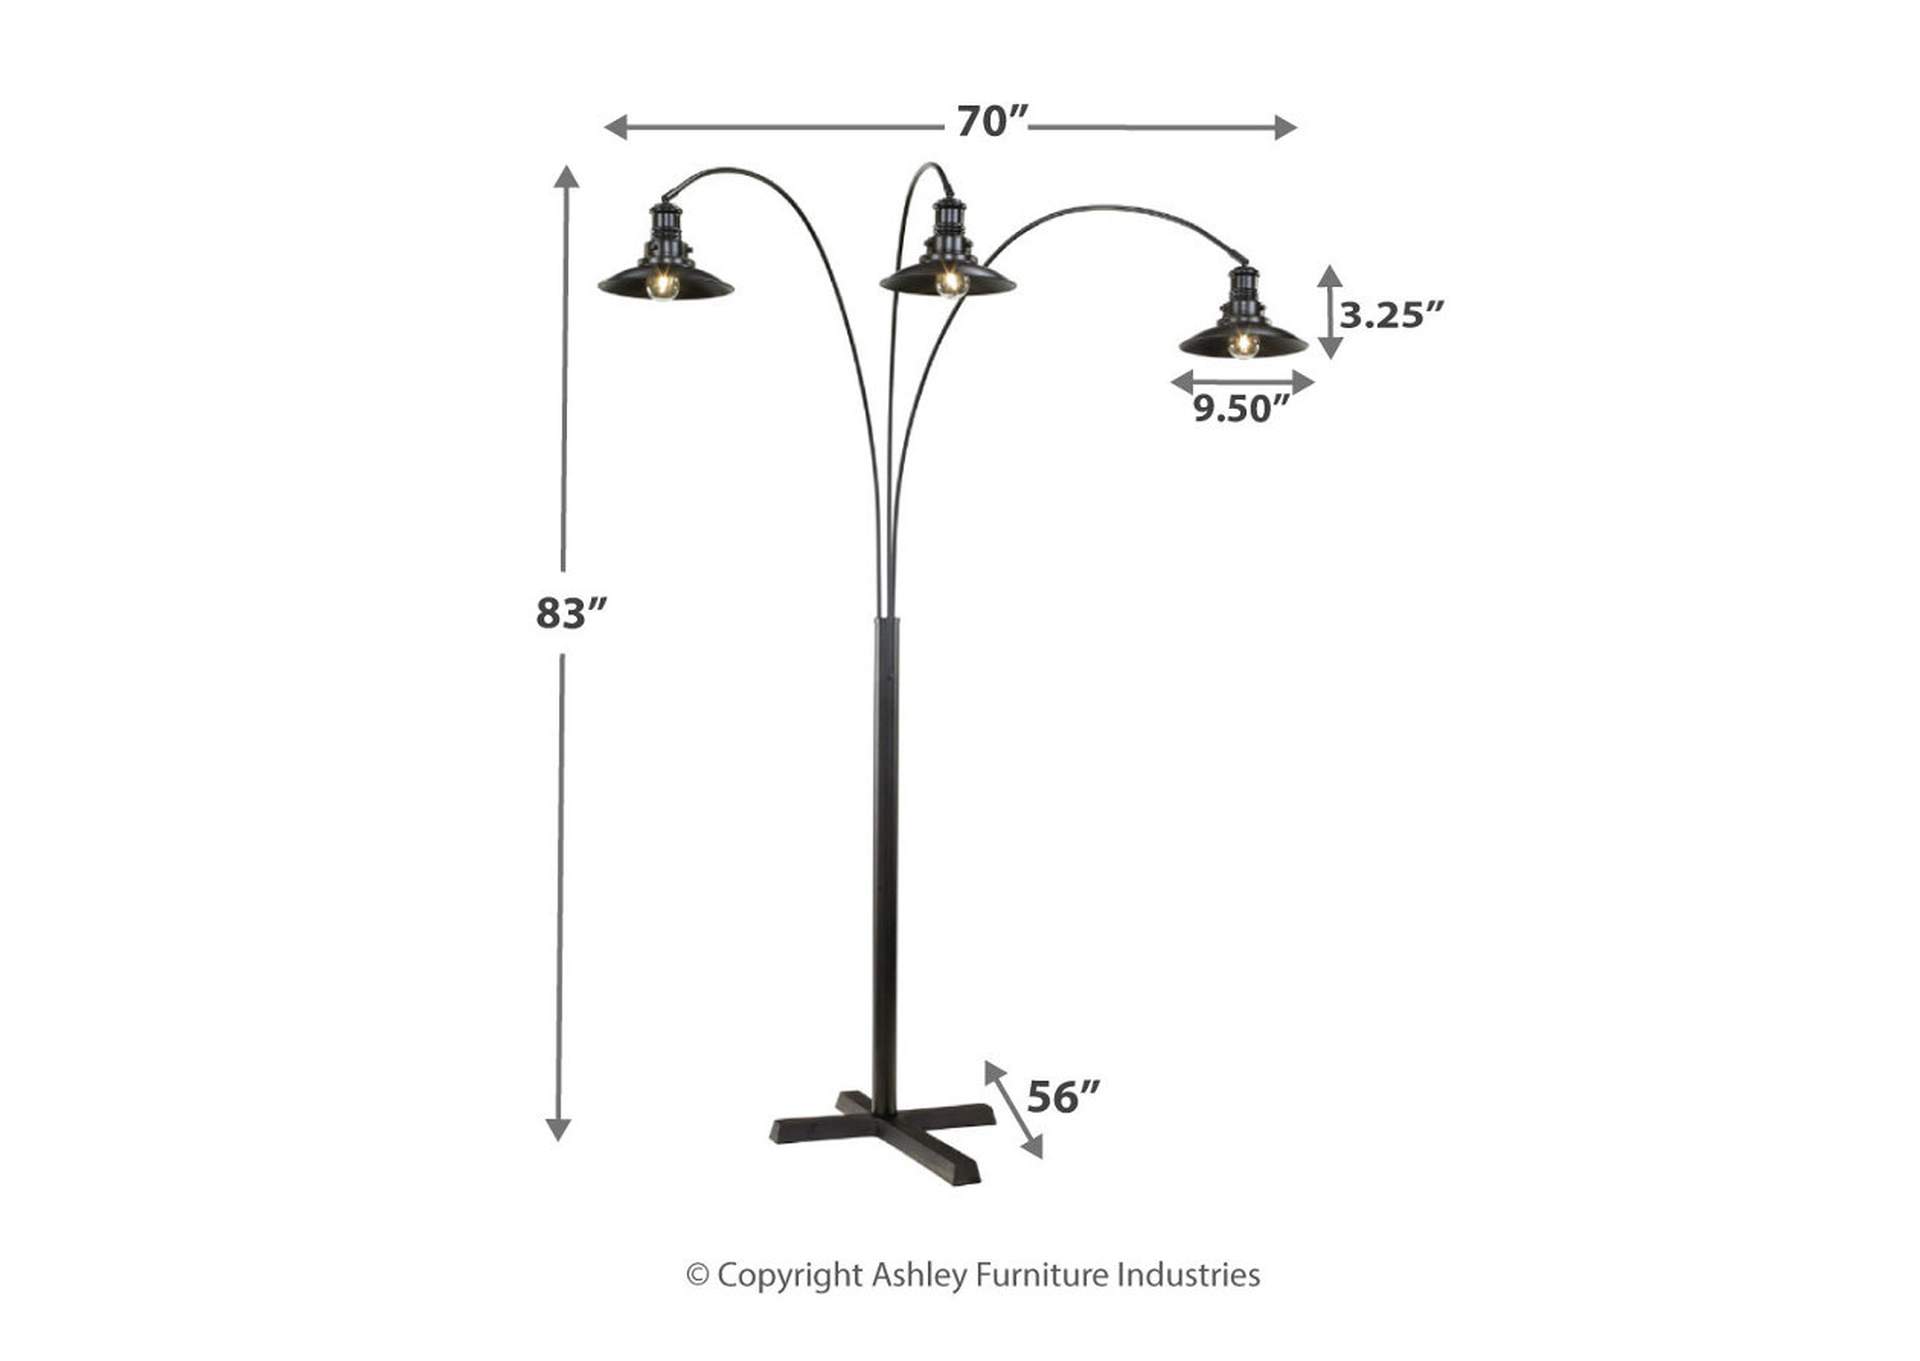 Sheriel Floor Lamp,Direct To Consumer Express